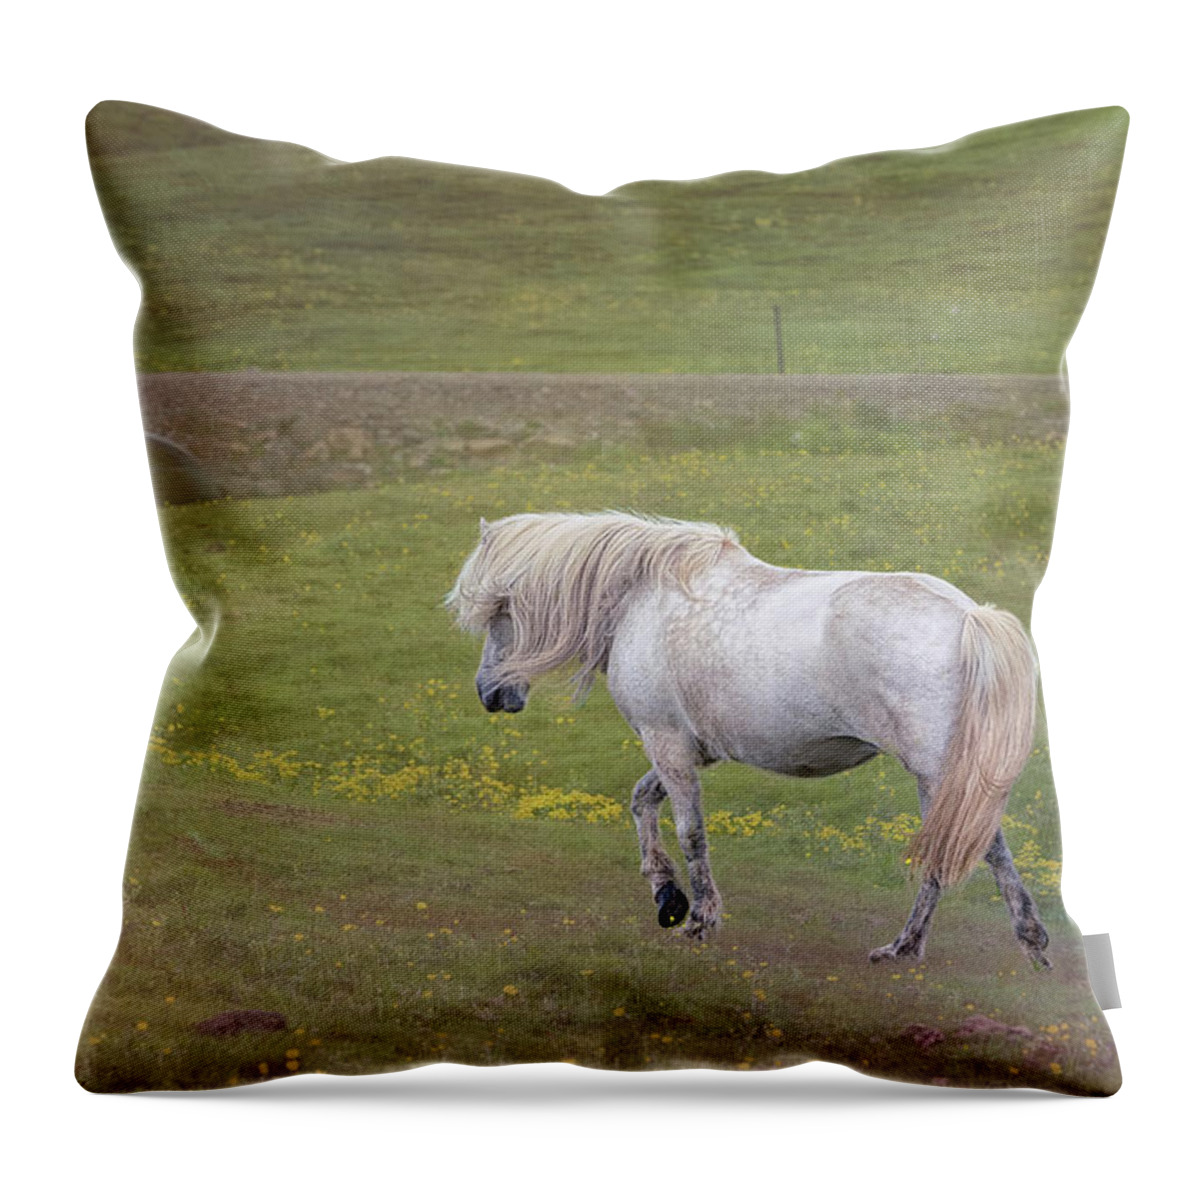 Iceland Throw Pillow featuring the photograph Icelandic Horse by Tom Singleton